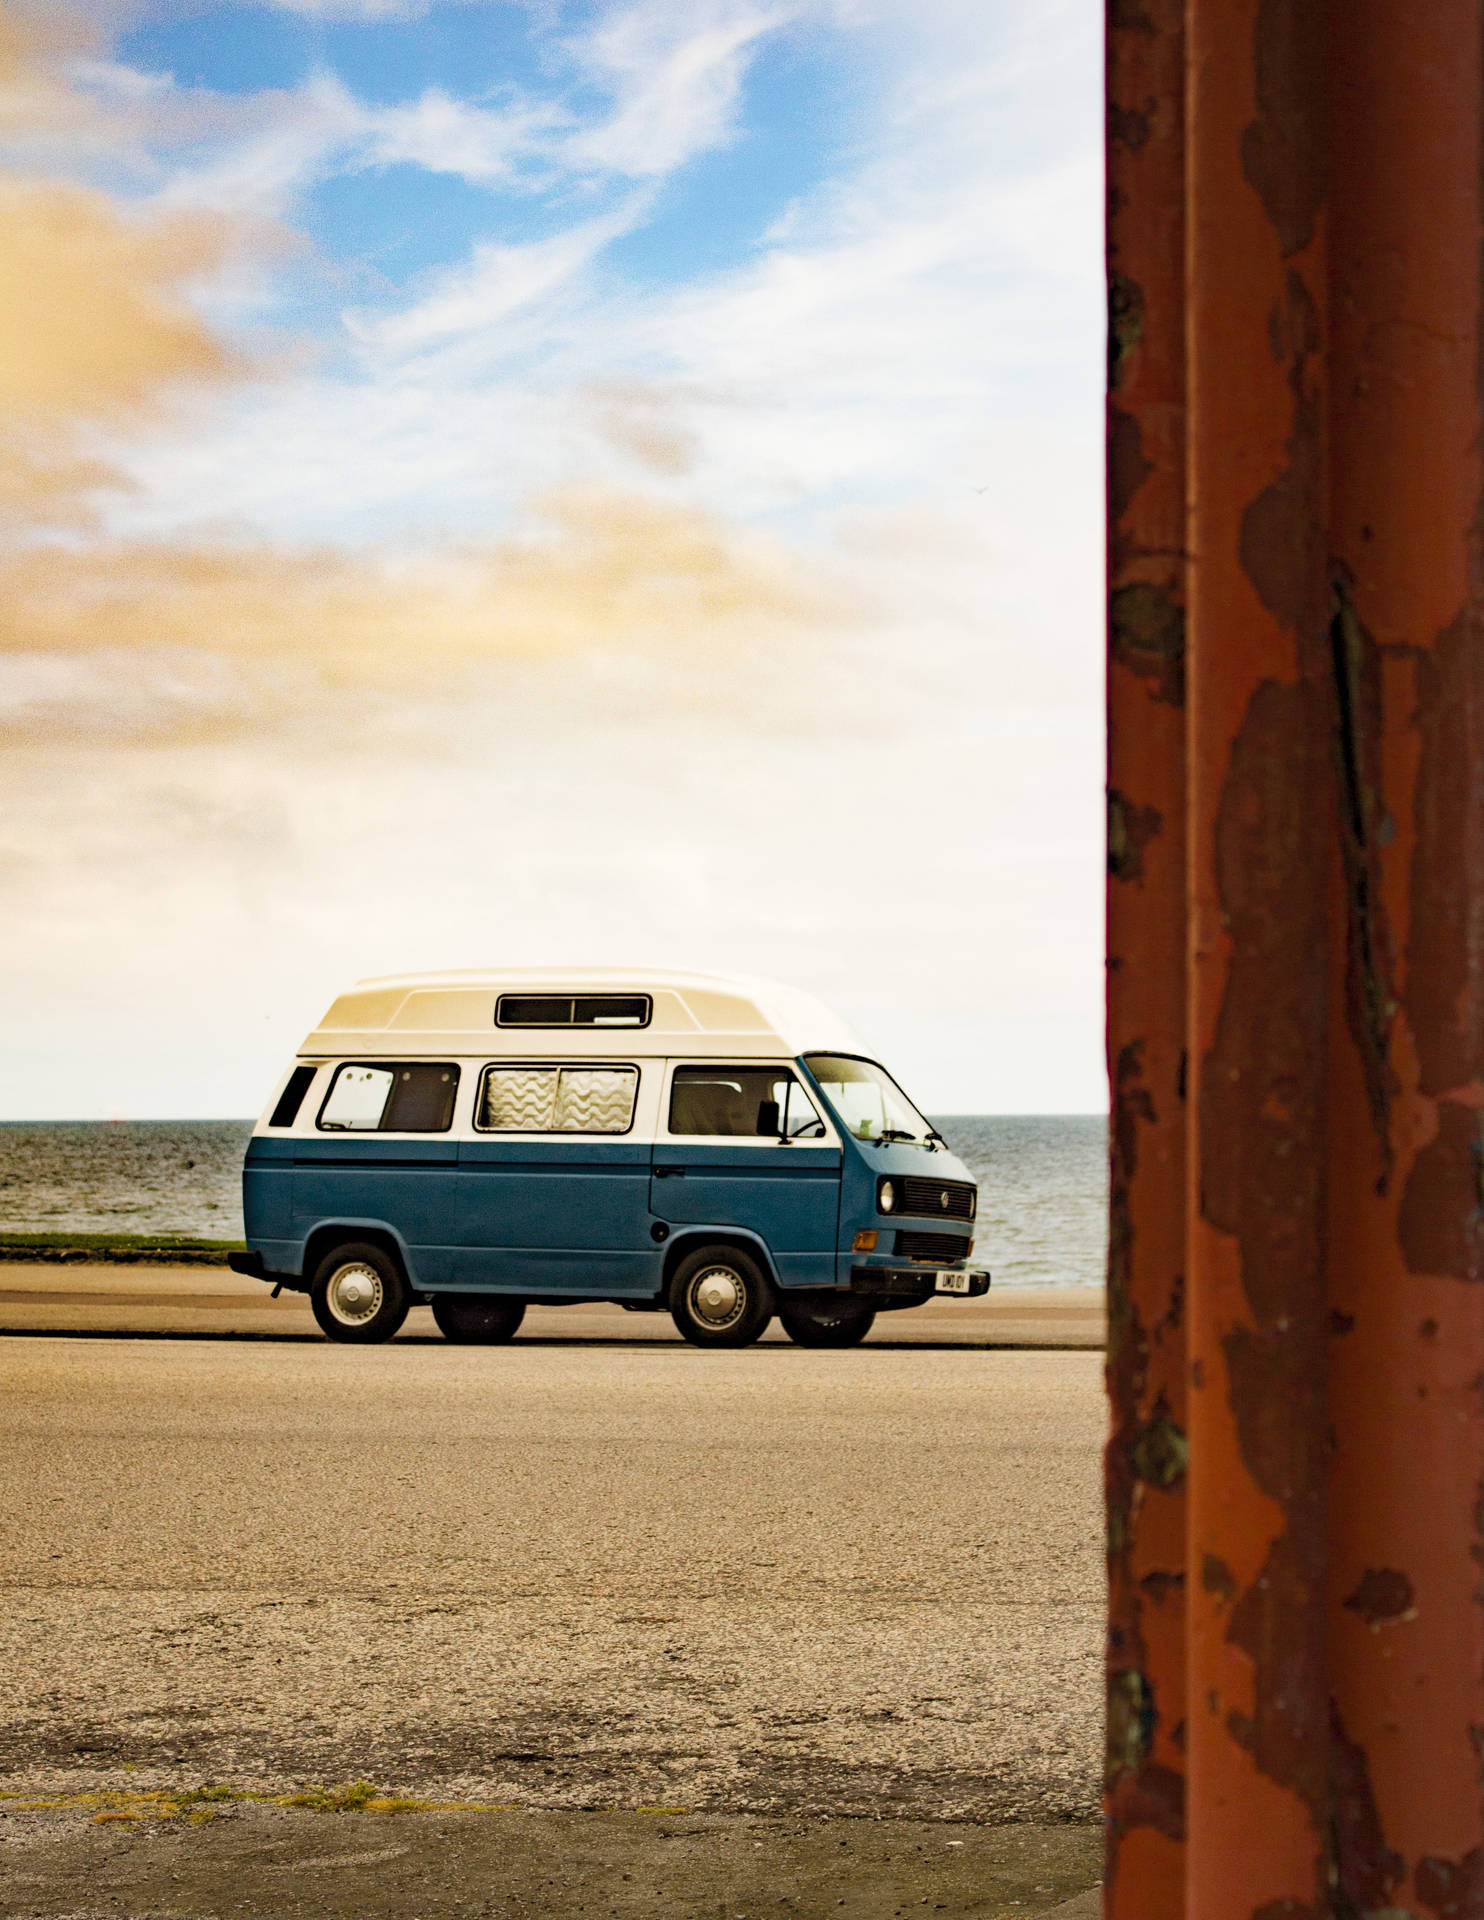 A Nostalgic Ride With A Volkswagen Type 2, Embracing The 70s Retro Aesthetic. Background